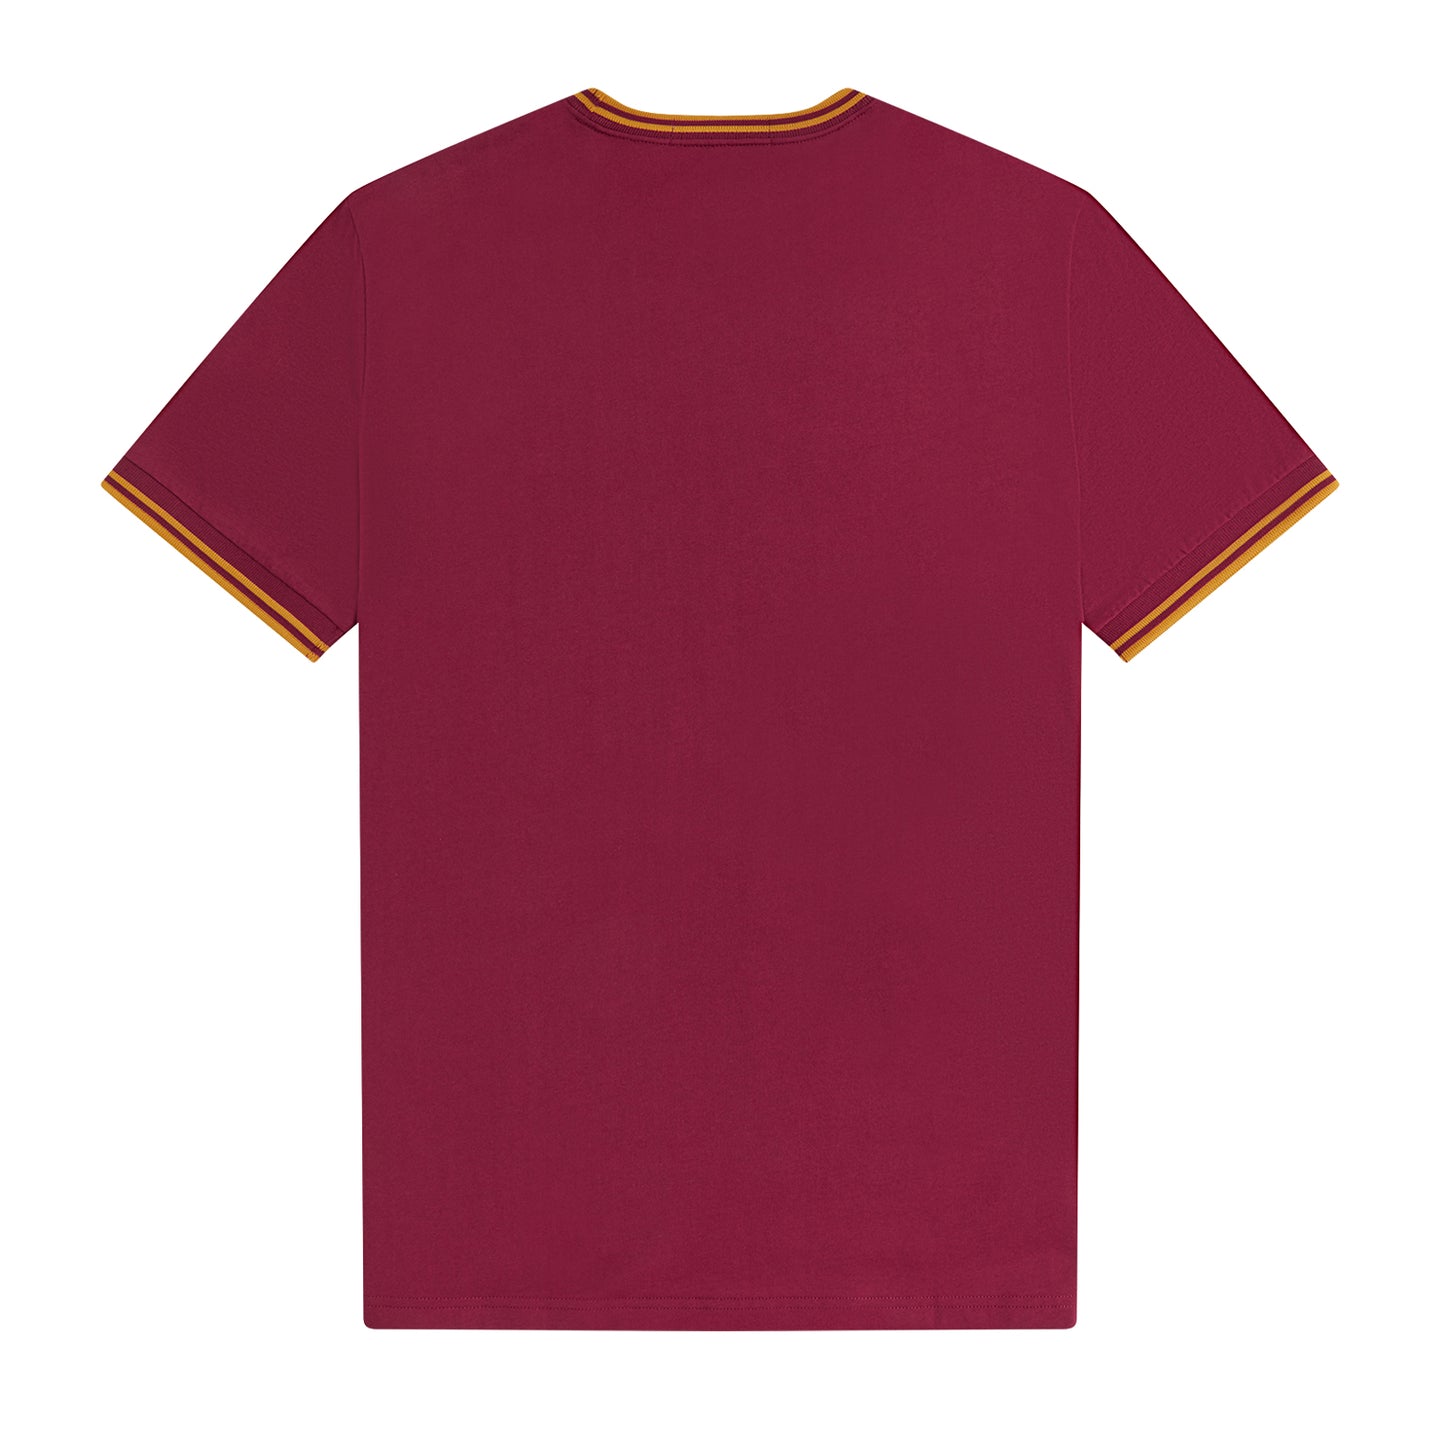 Fred Perry Twin Tipped T-Shirt Tawny Port. Foto de trás.